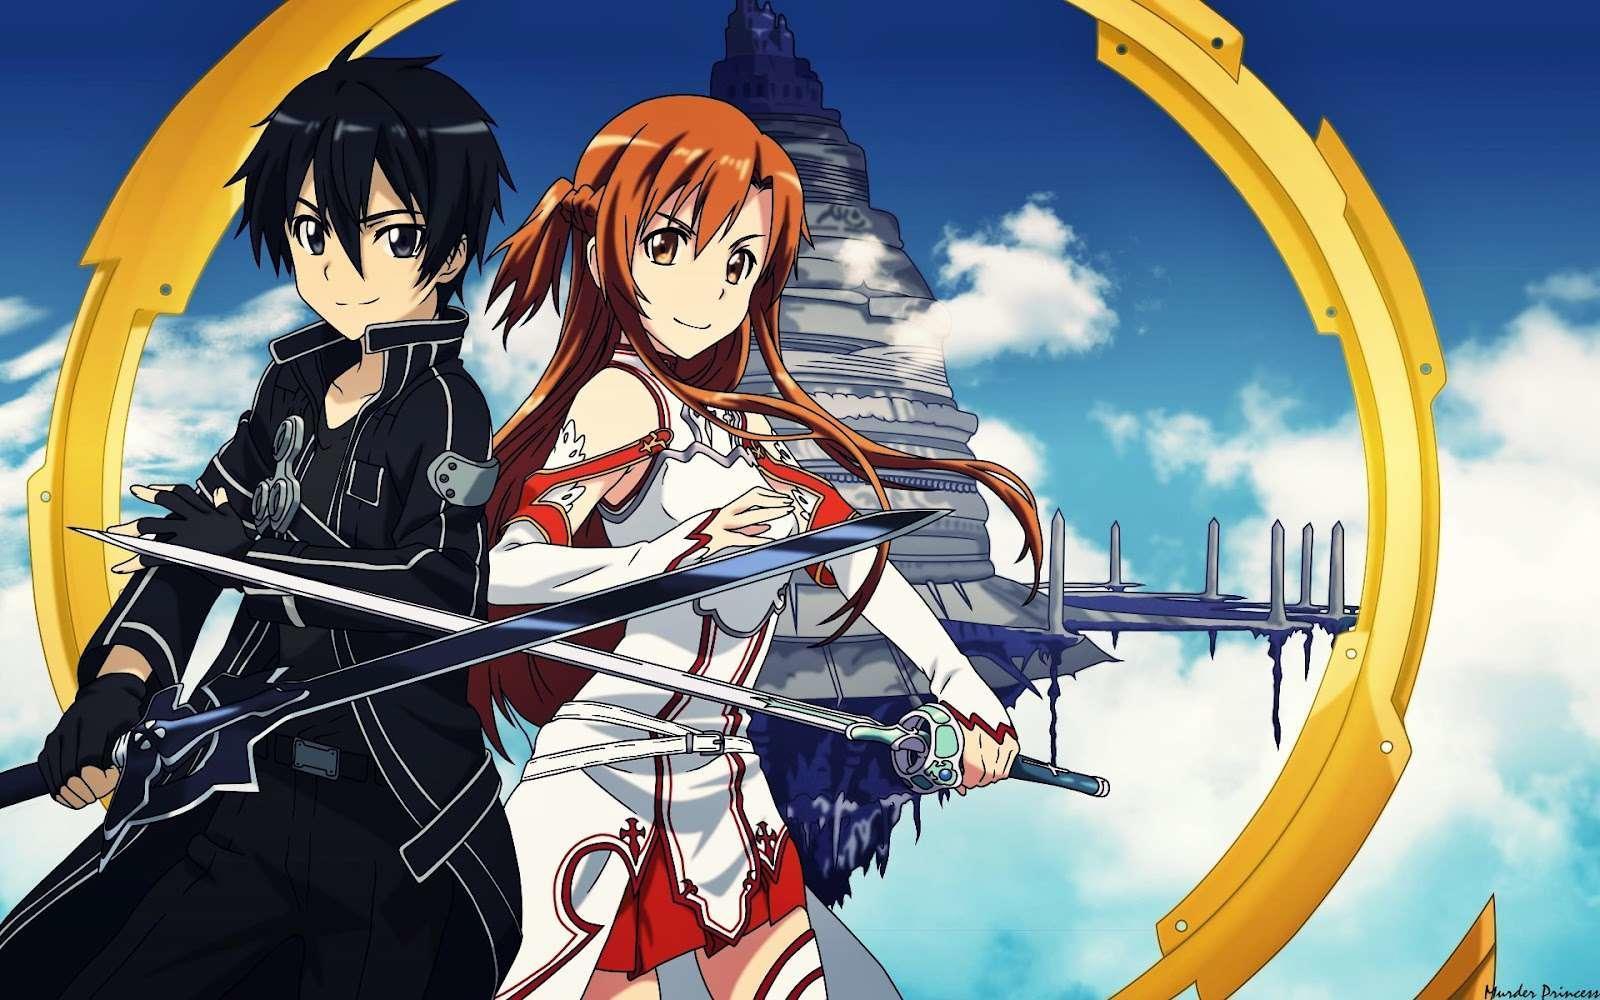 The upcoming title in the Sword Art Online franchise, SWORD ART